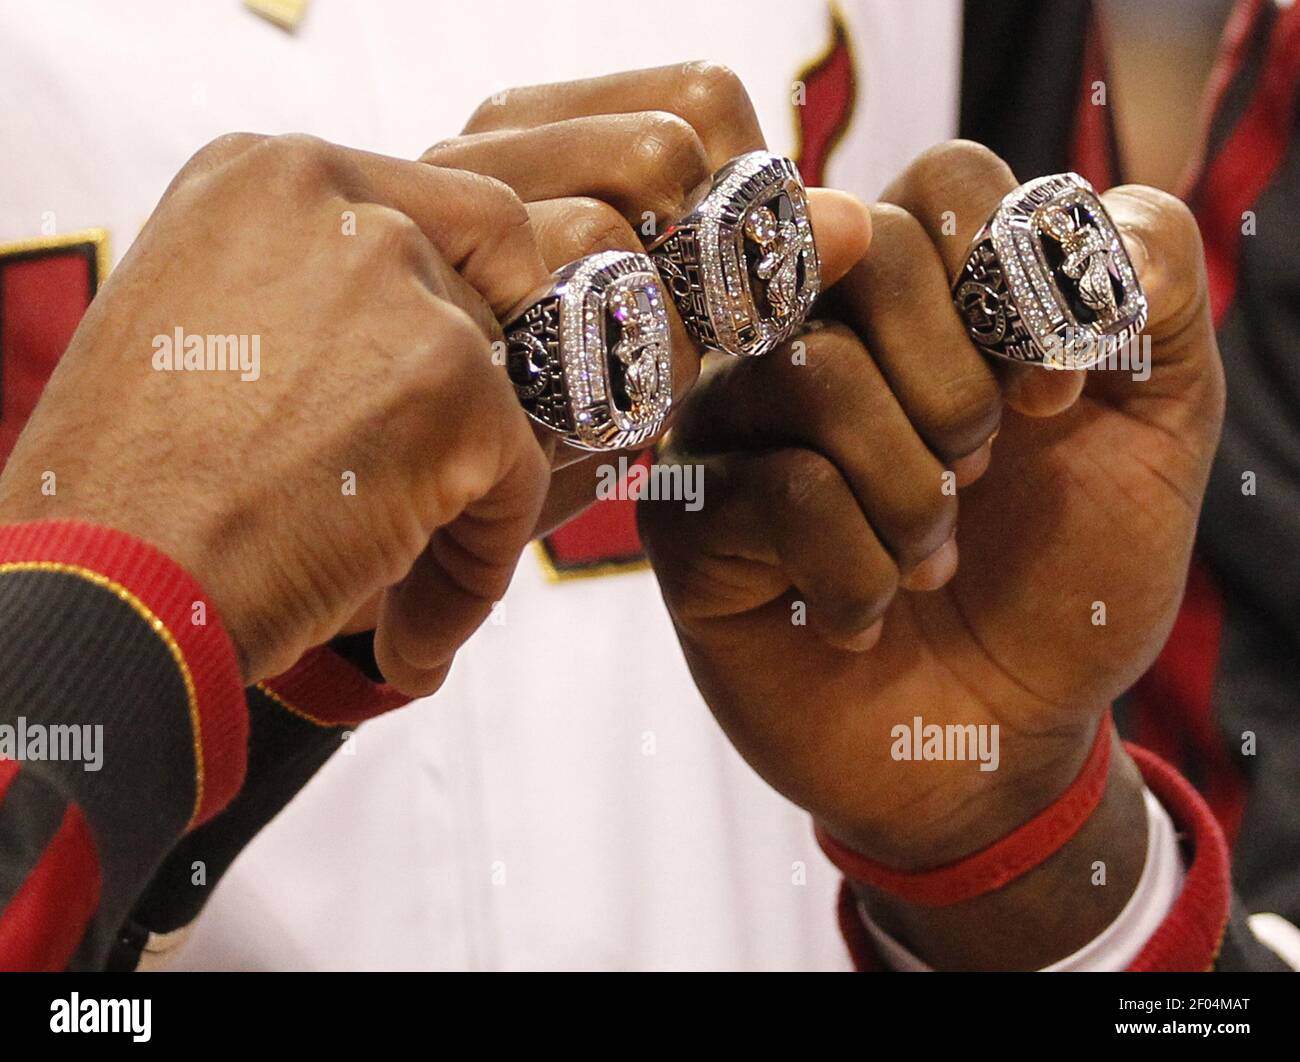 The Miami Heat's Dwyane Wade, Chris Bosh and LeBron James show their NBA Championship  rings during a ceremony at the American Airlines Arena in Miami, Florida,  before the season-opener against the Boston